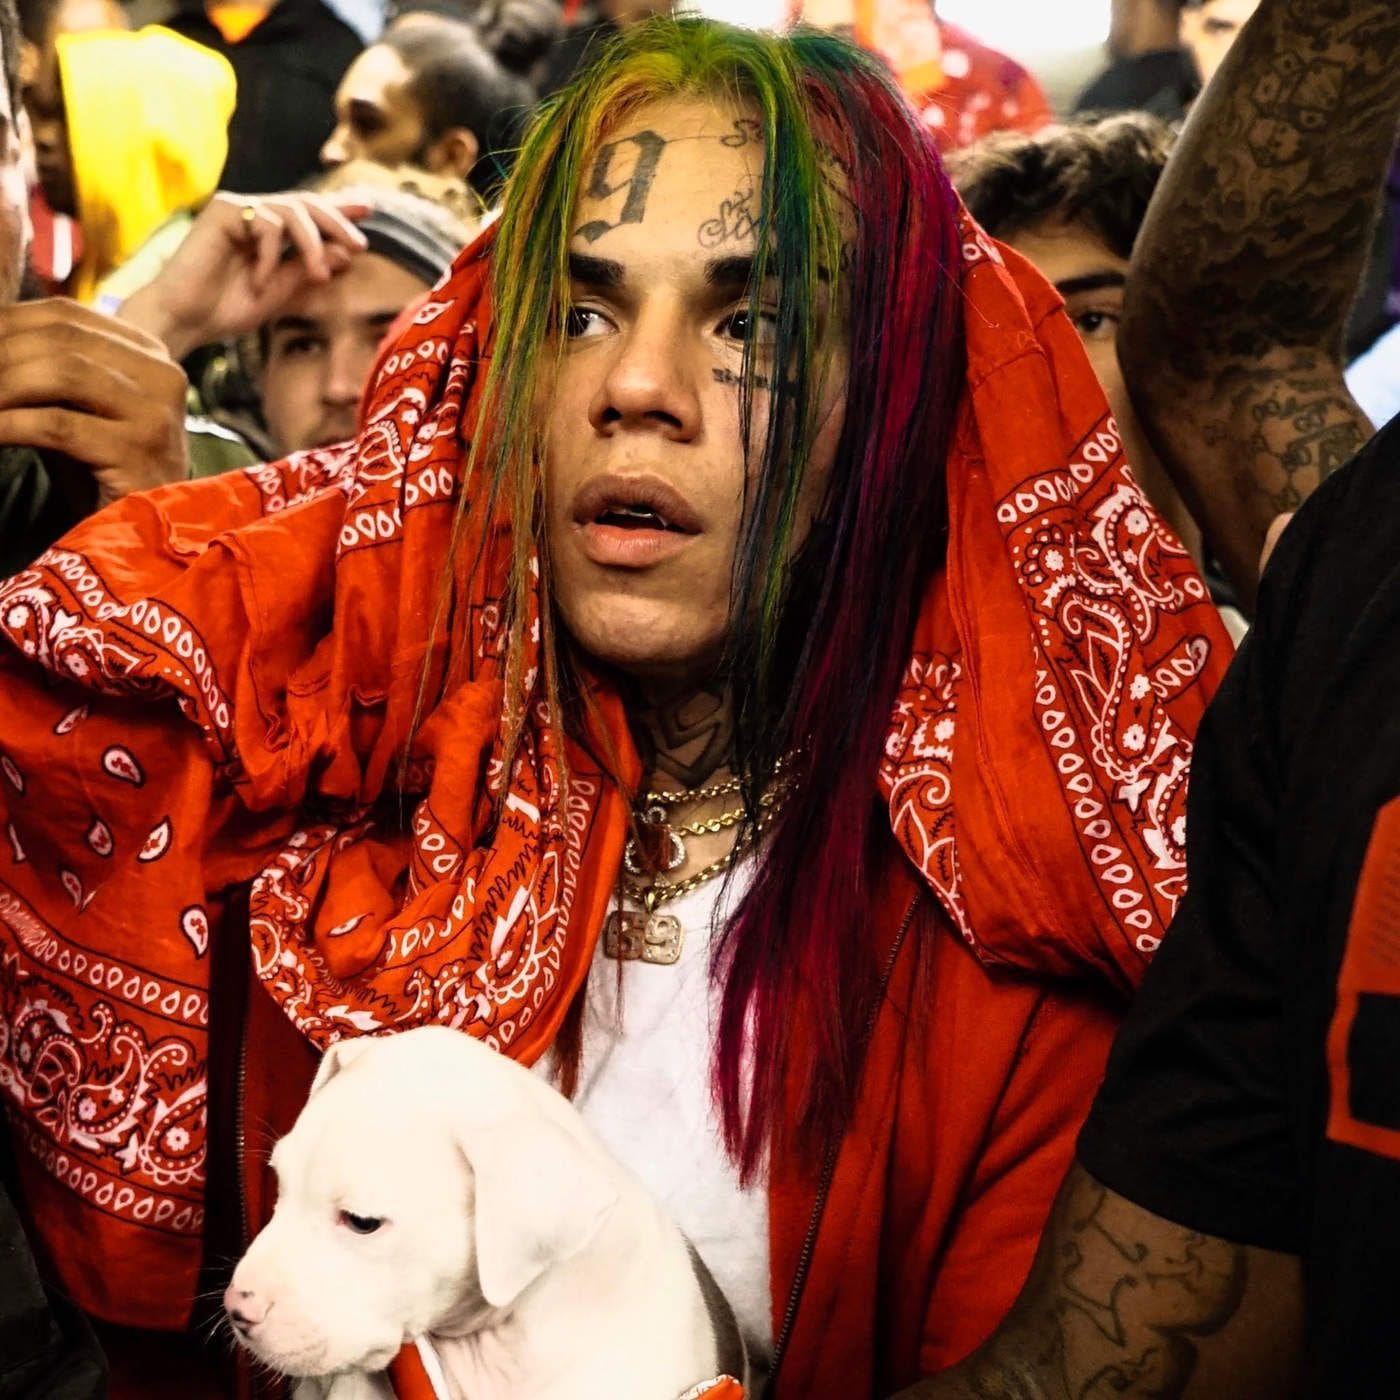 Tekashi 69 Is Released From Prison - The Rapper Will Serve The Rest Of His Sentence Under House Alert